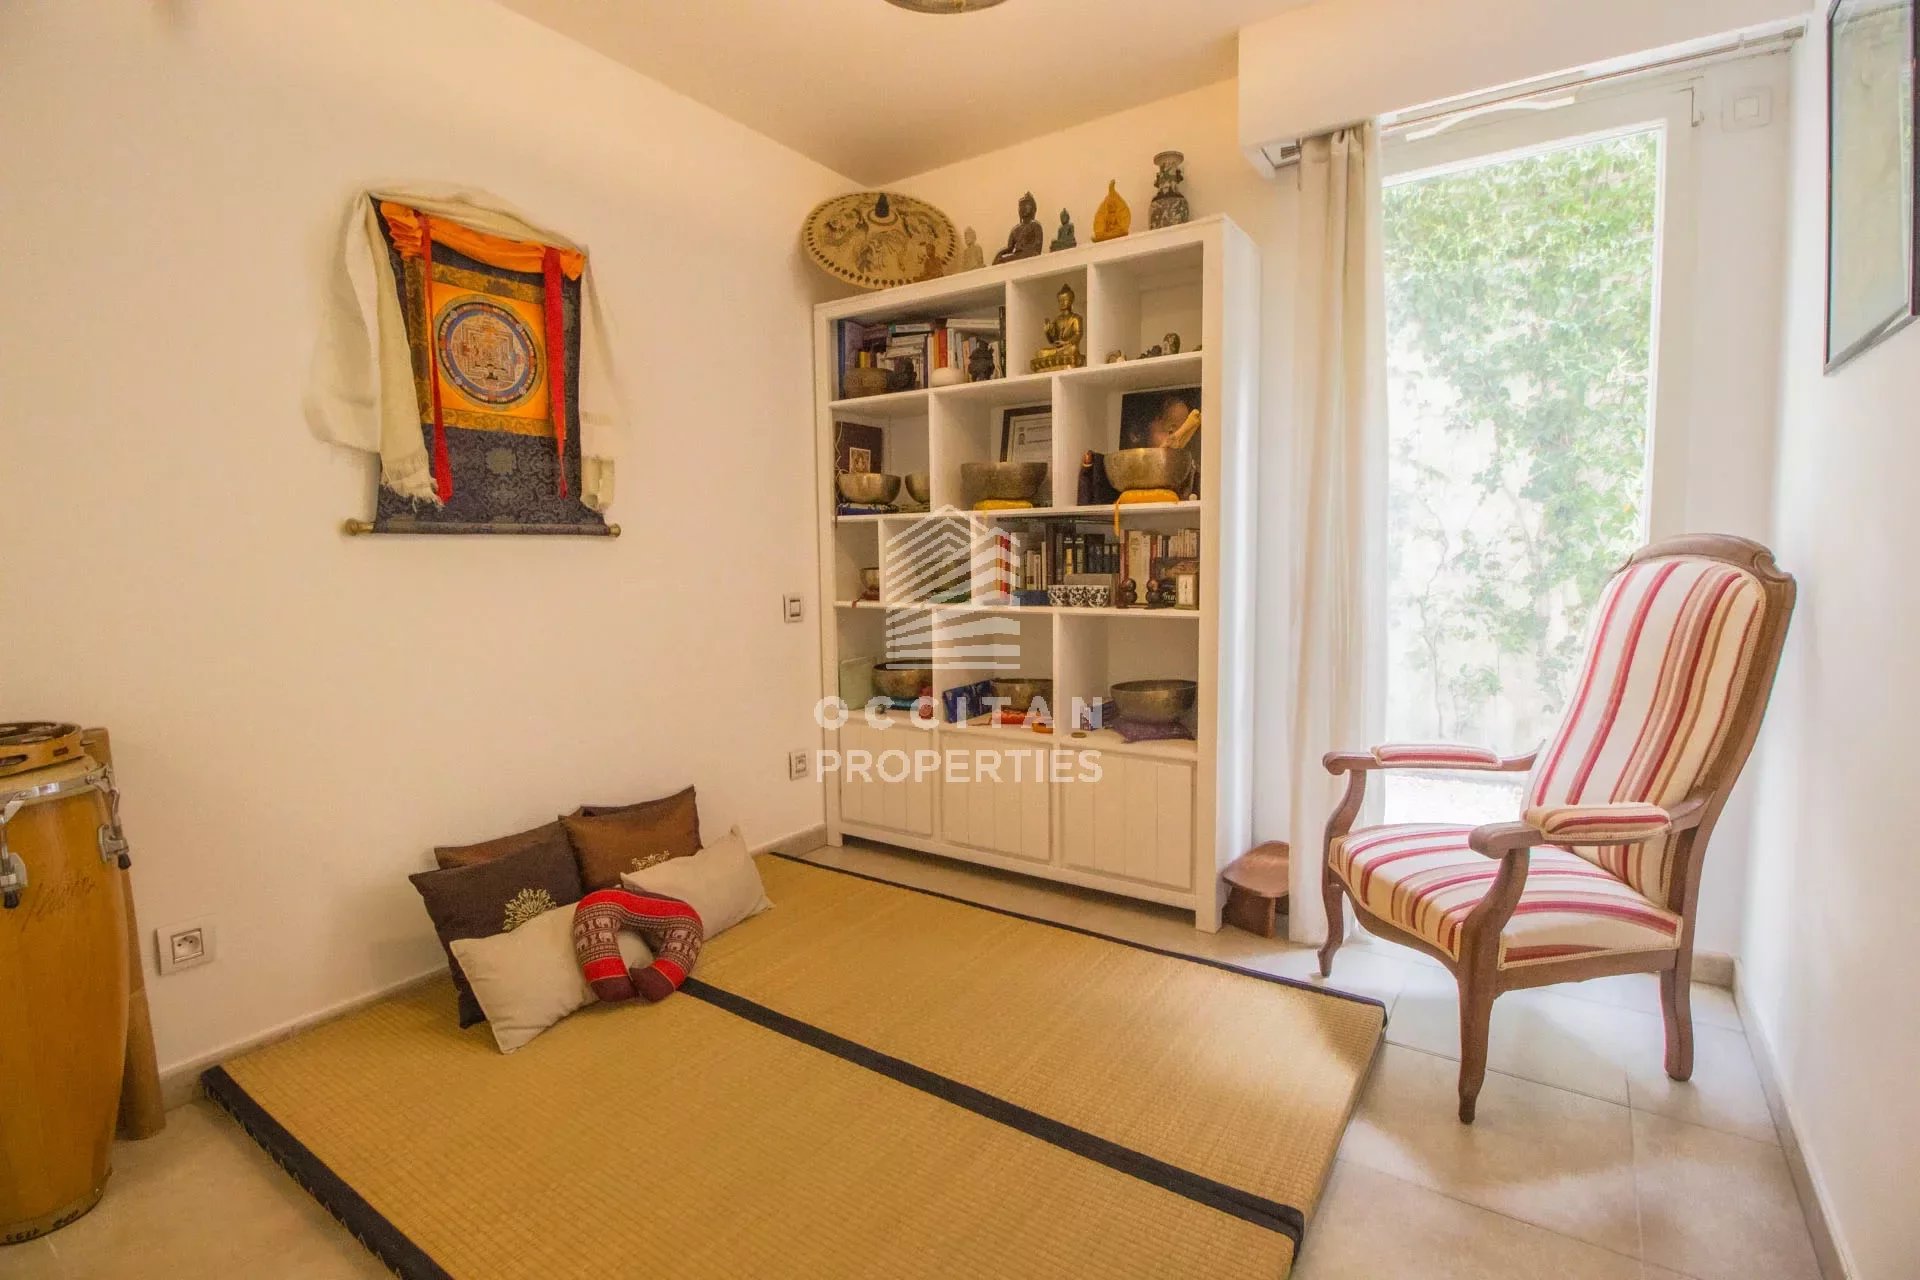 Garden-level apartment - Open view - Pool - 15 minutes by walk from rue d'Antibes